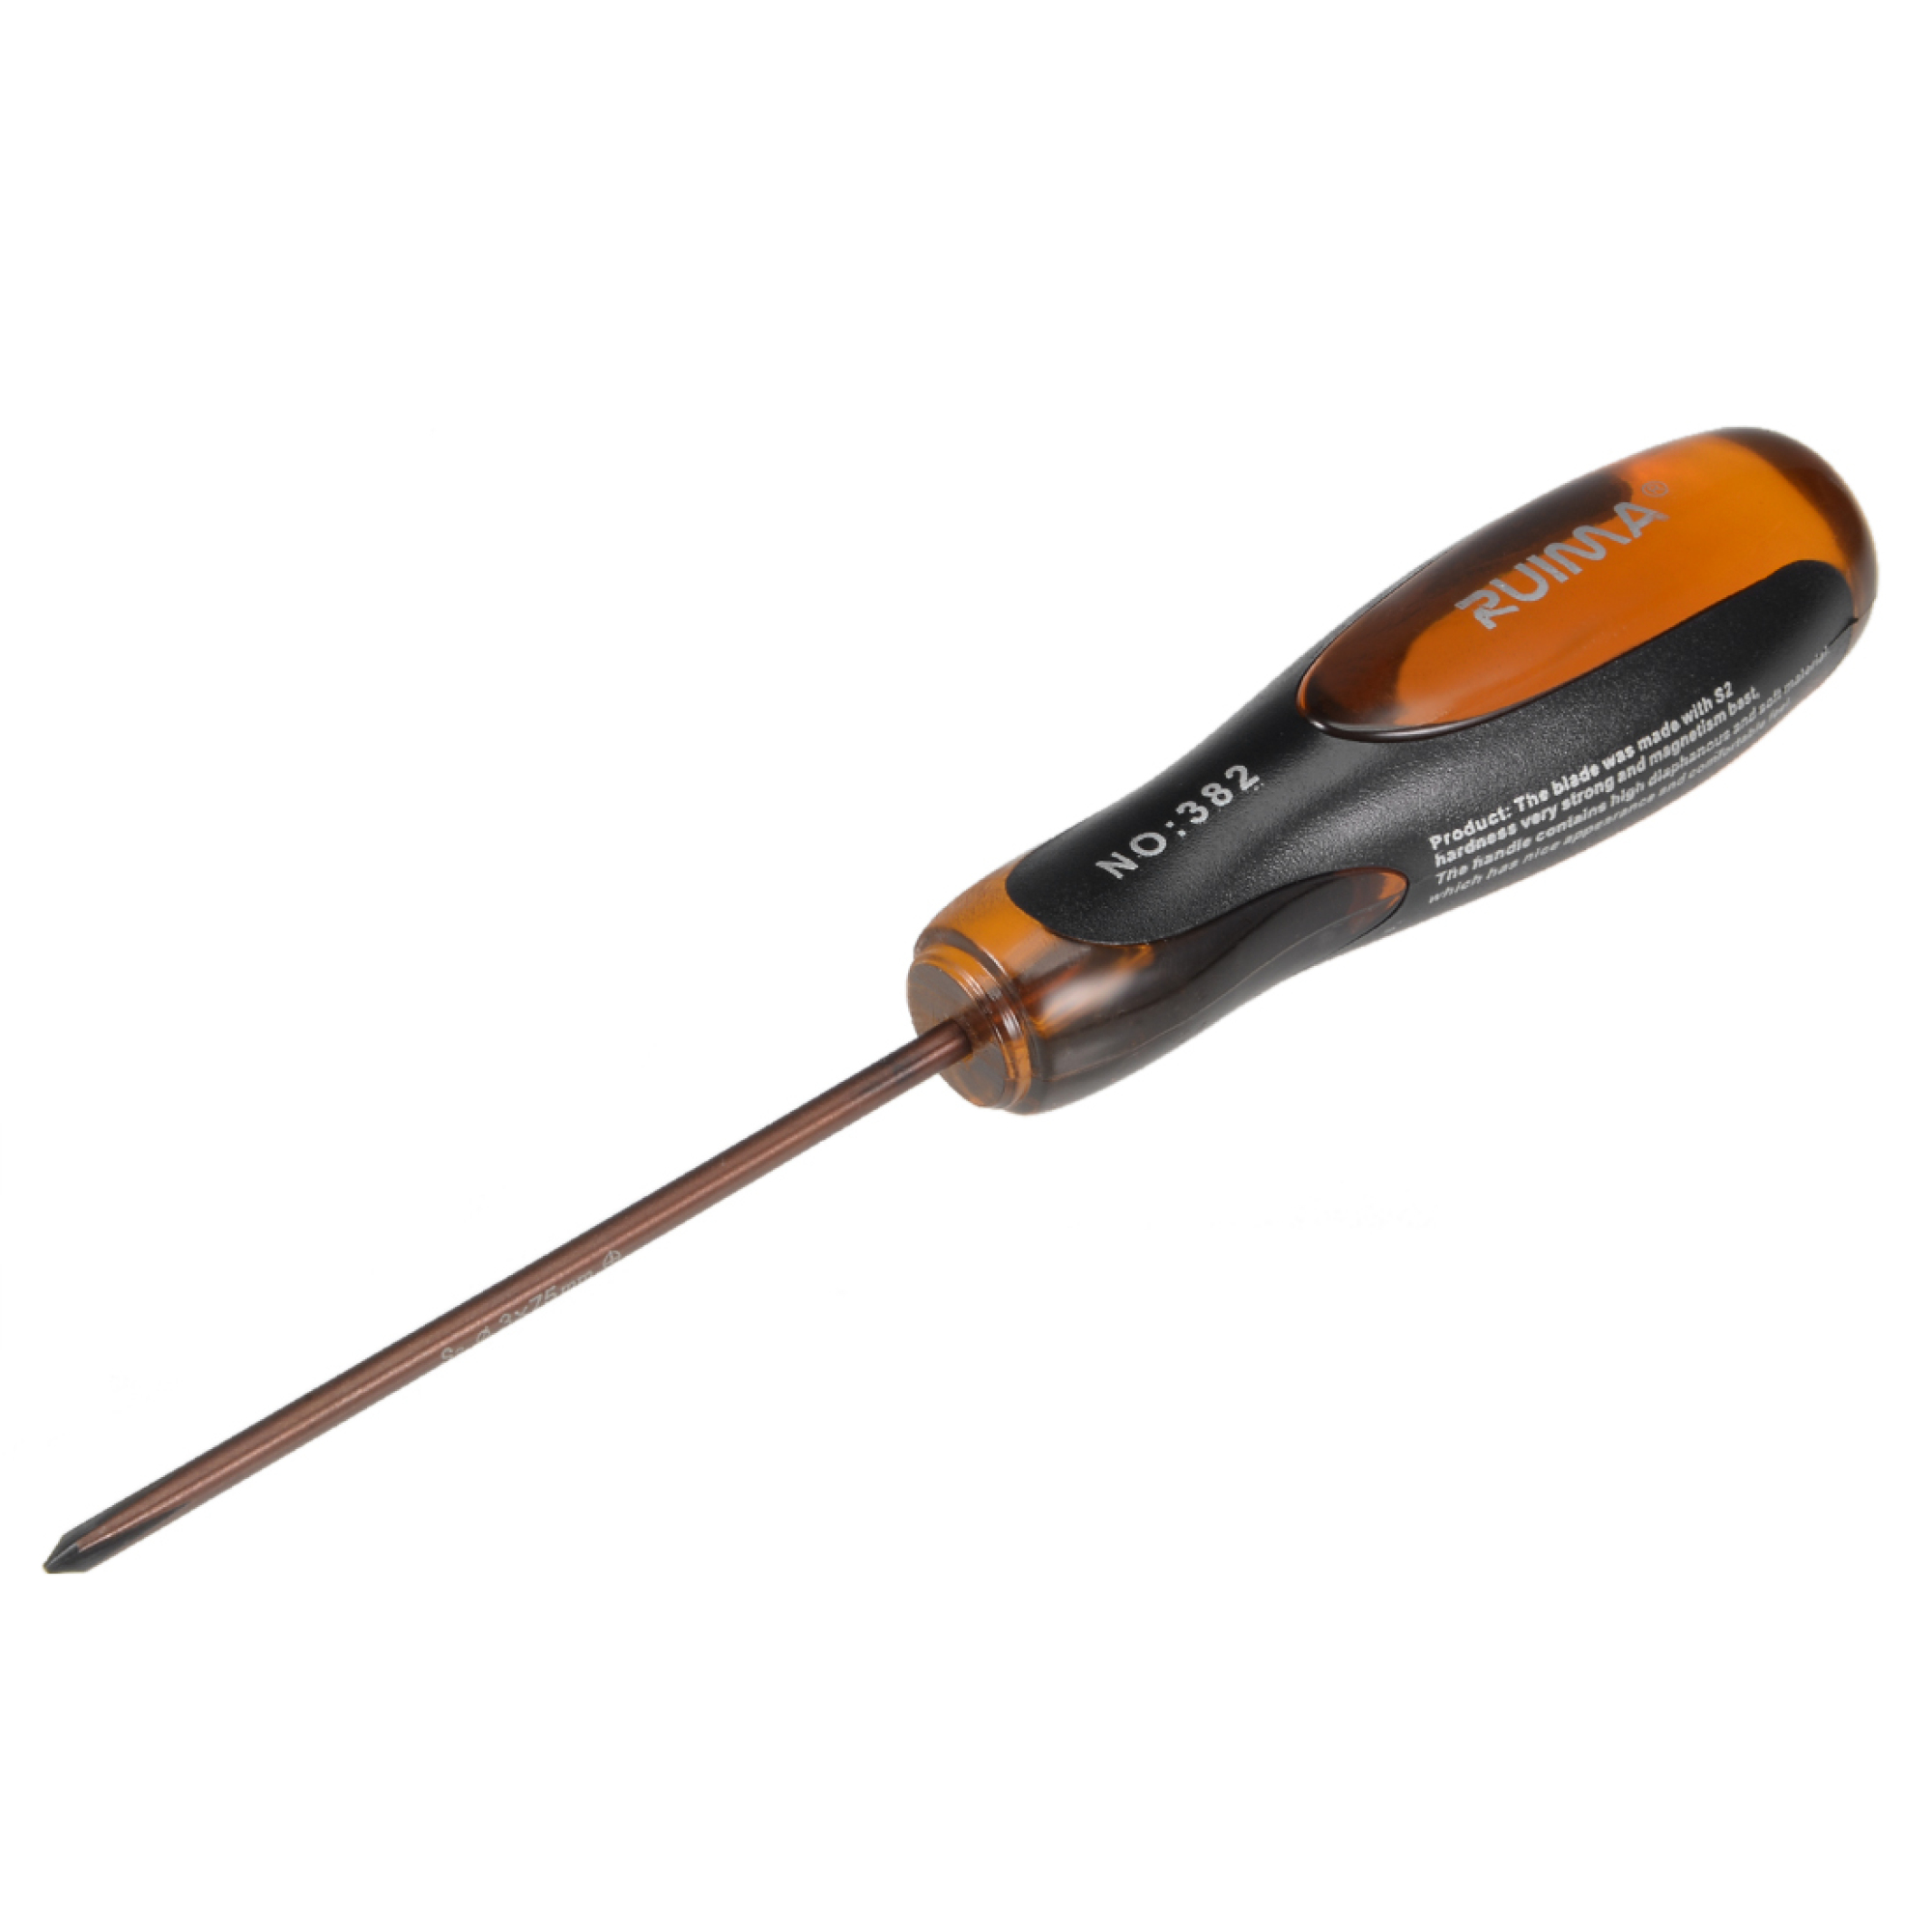 PH0 Phillips Magnetic Screwdriver 3 Inch Round Shaft Grip